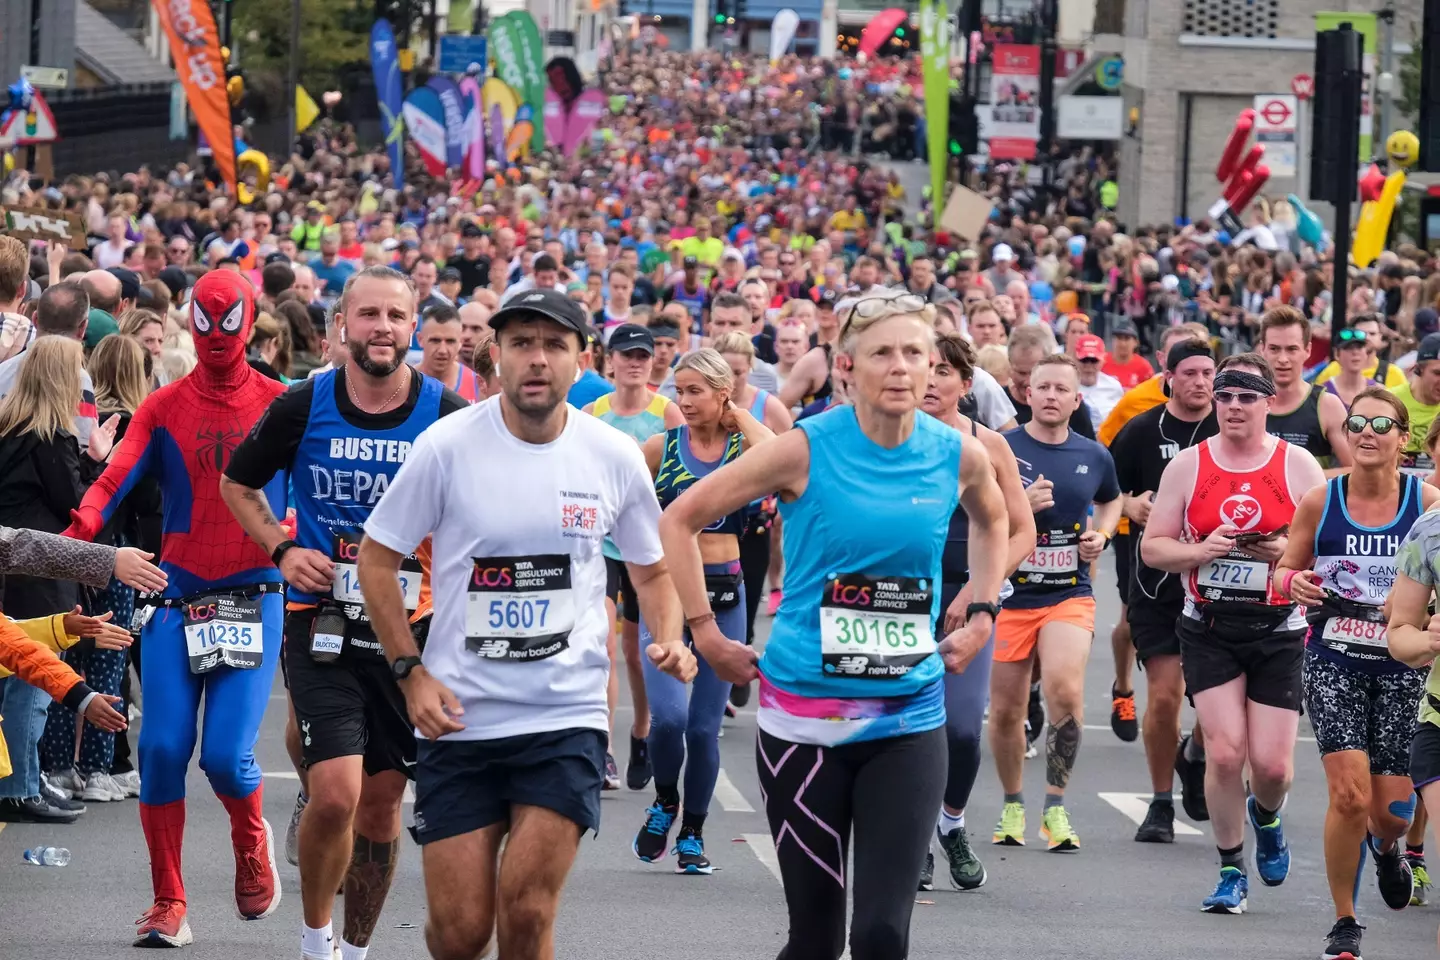 More than 40,000 runners took part in yesterday's marathon.